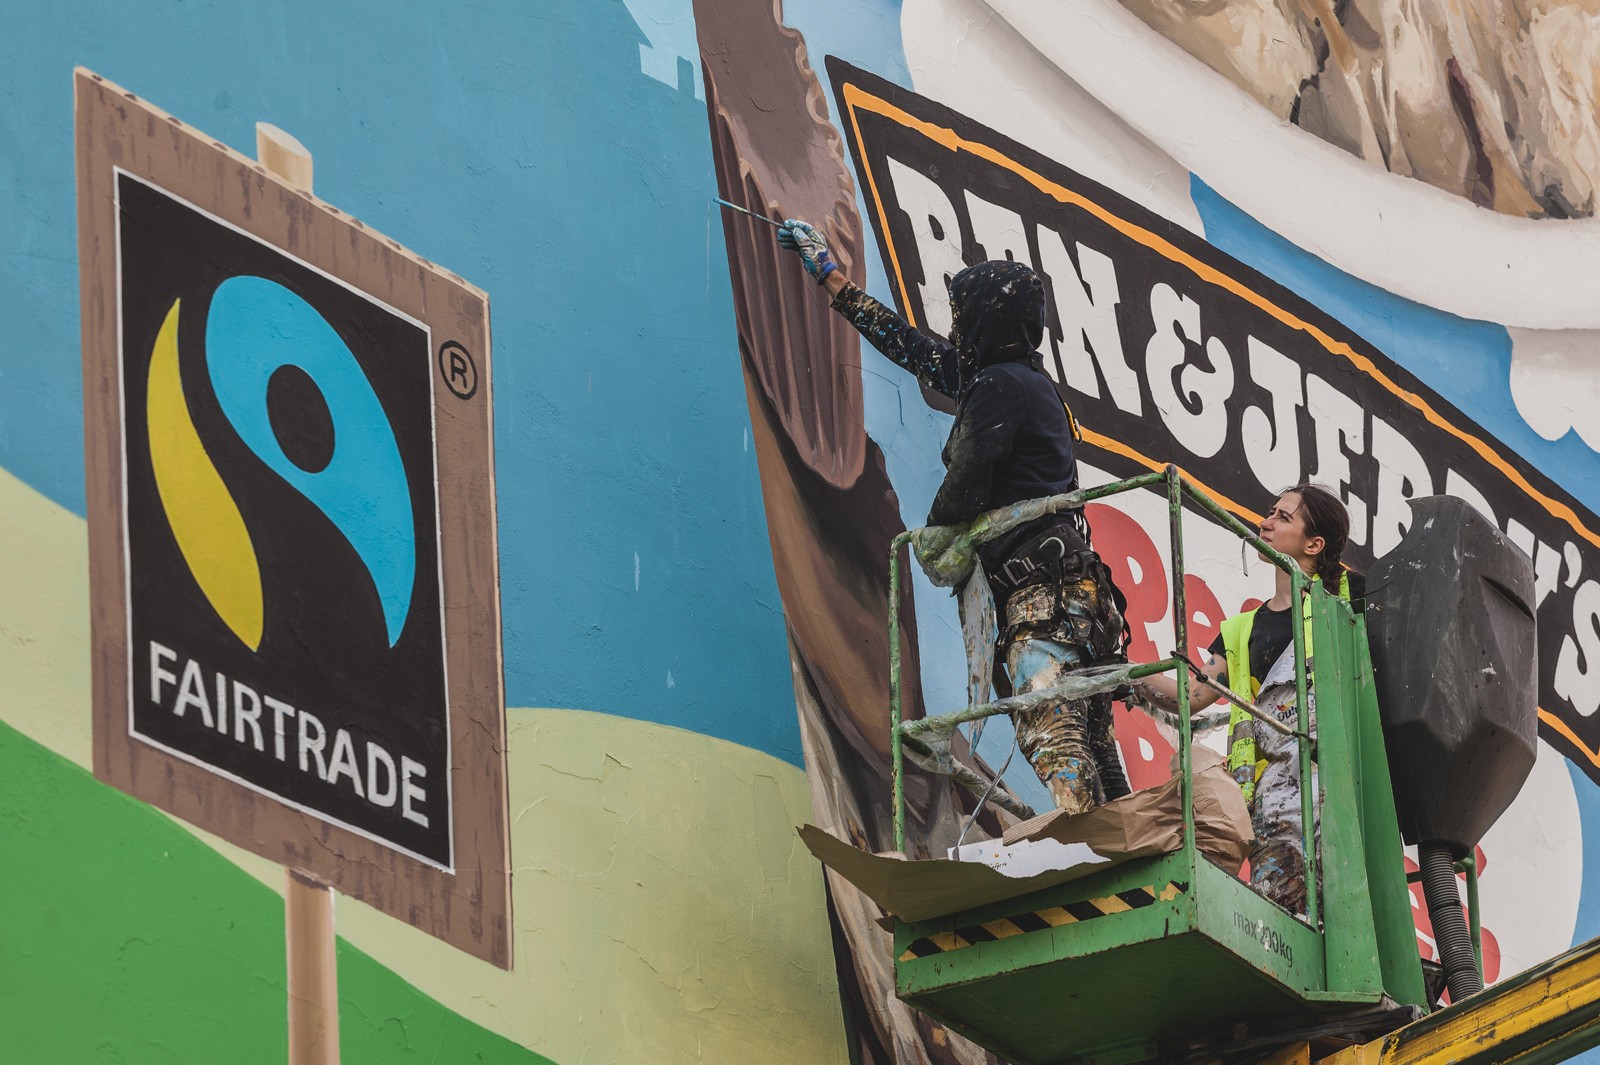 Ben&Jerry's outdoor advertisement in the form of a mural Cracow | Ben & Jerry's | Portfolio